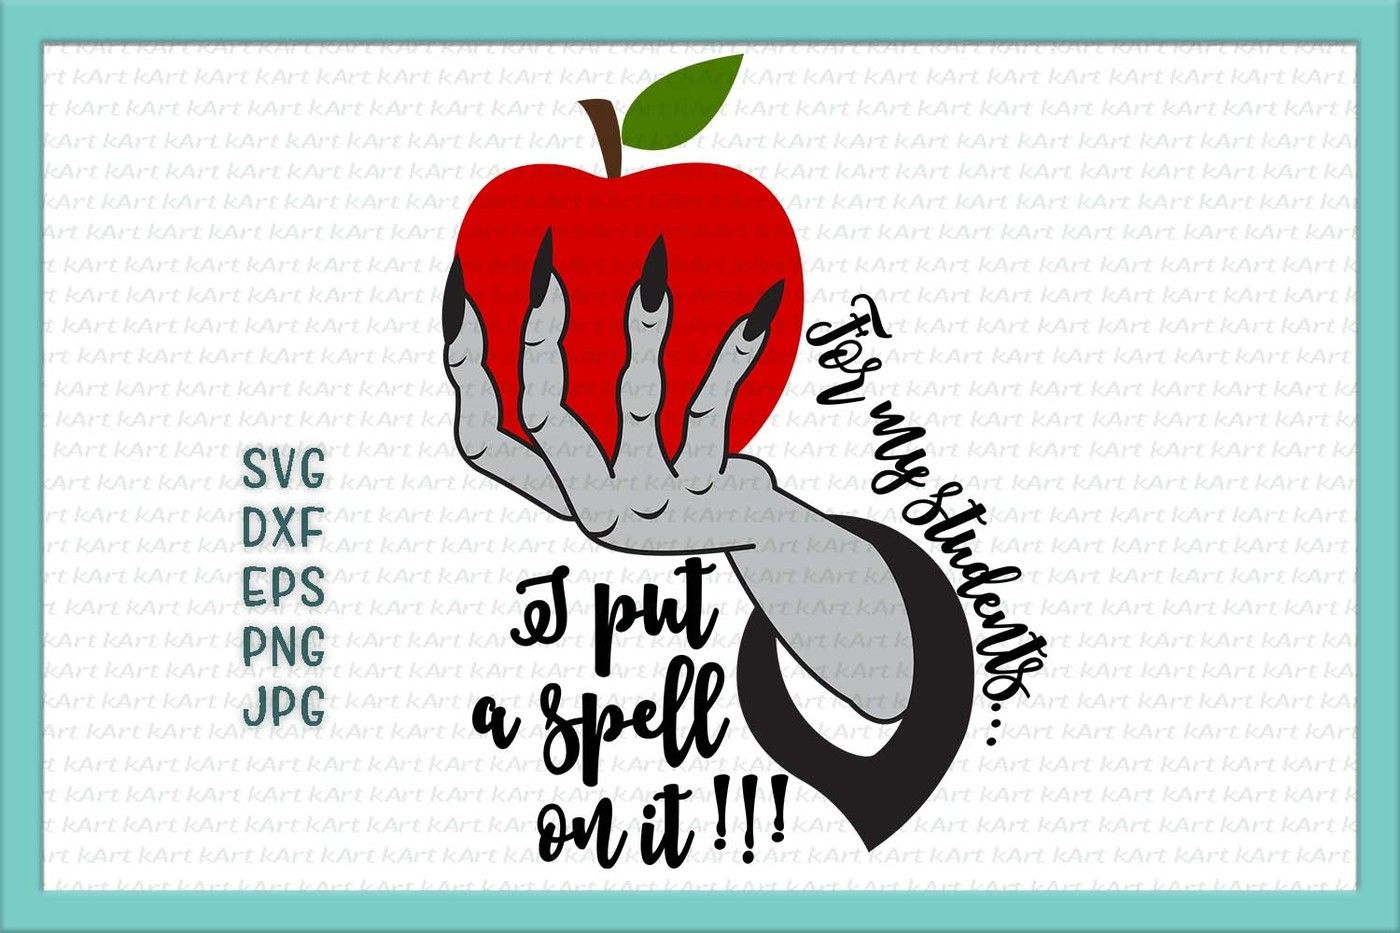 Download best teacher ever svg cut file and create your personal diy projec...